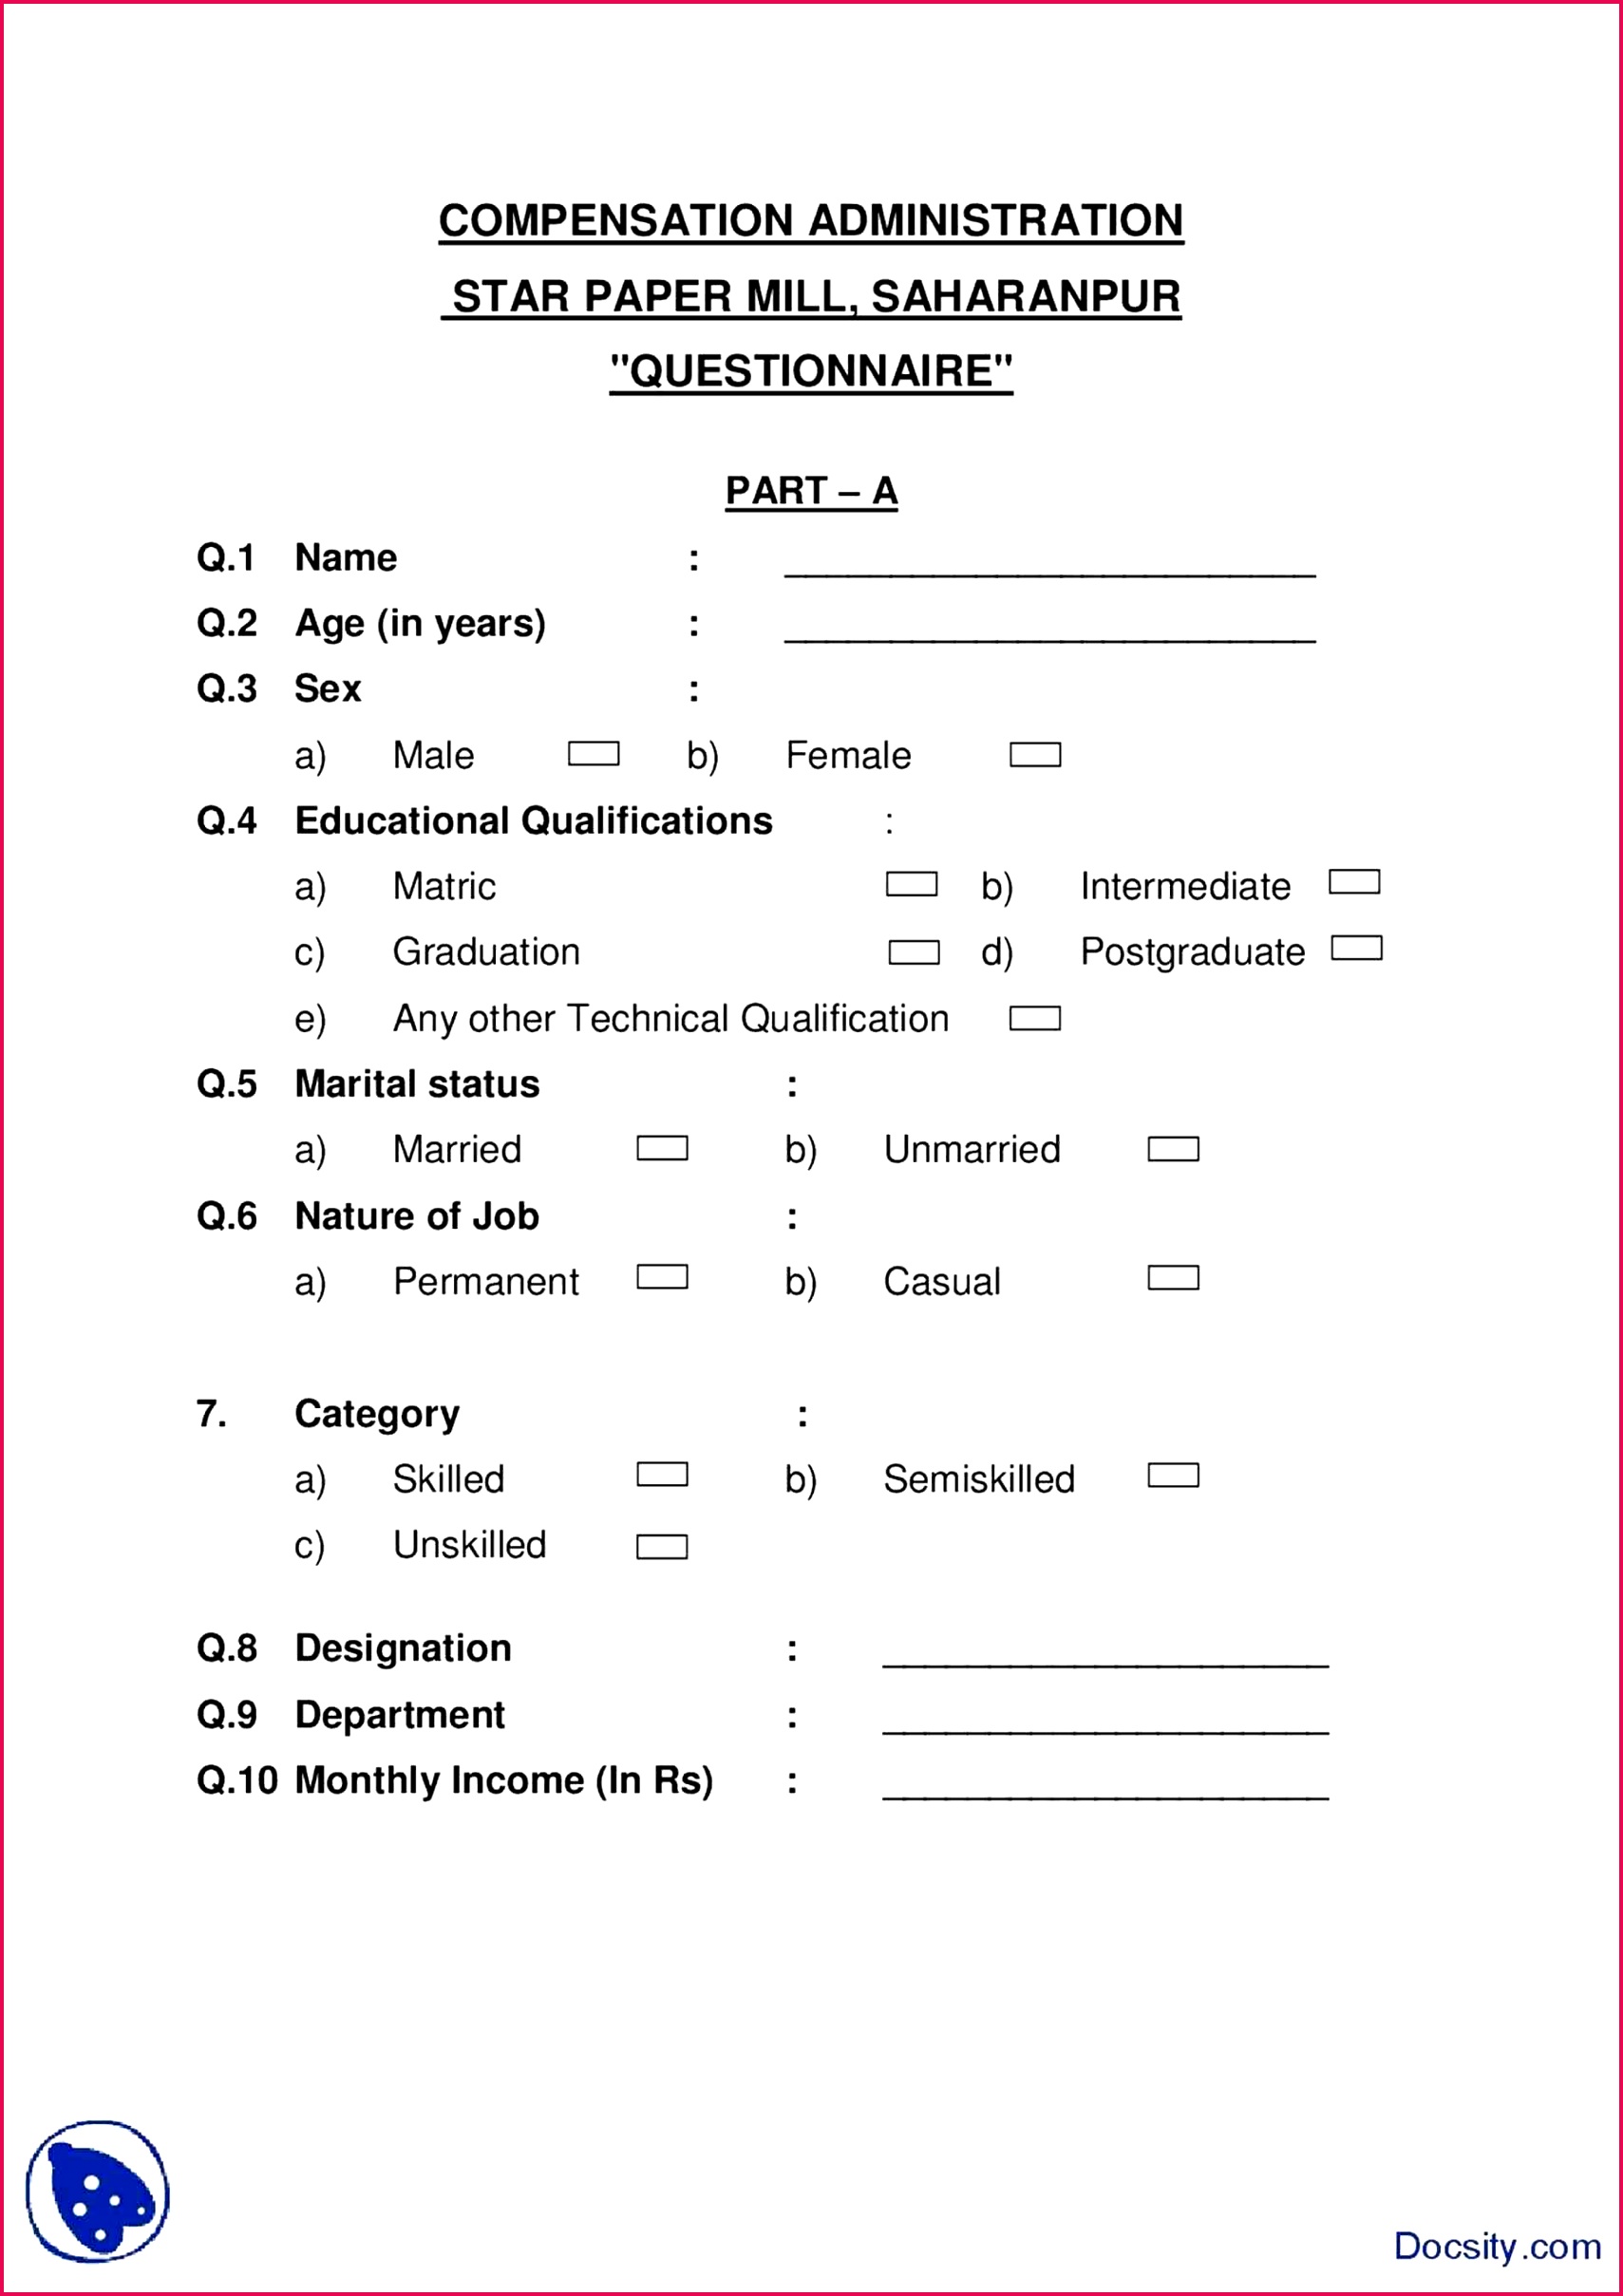 Pay for dissertation questionnaire